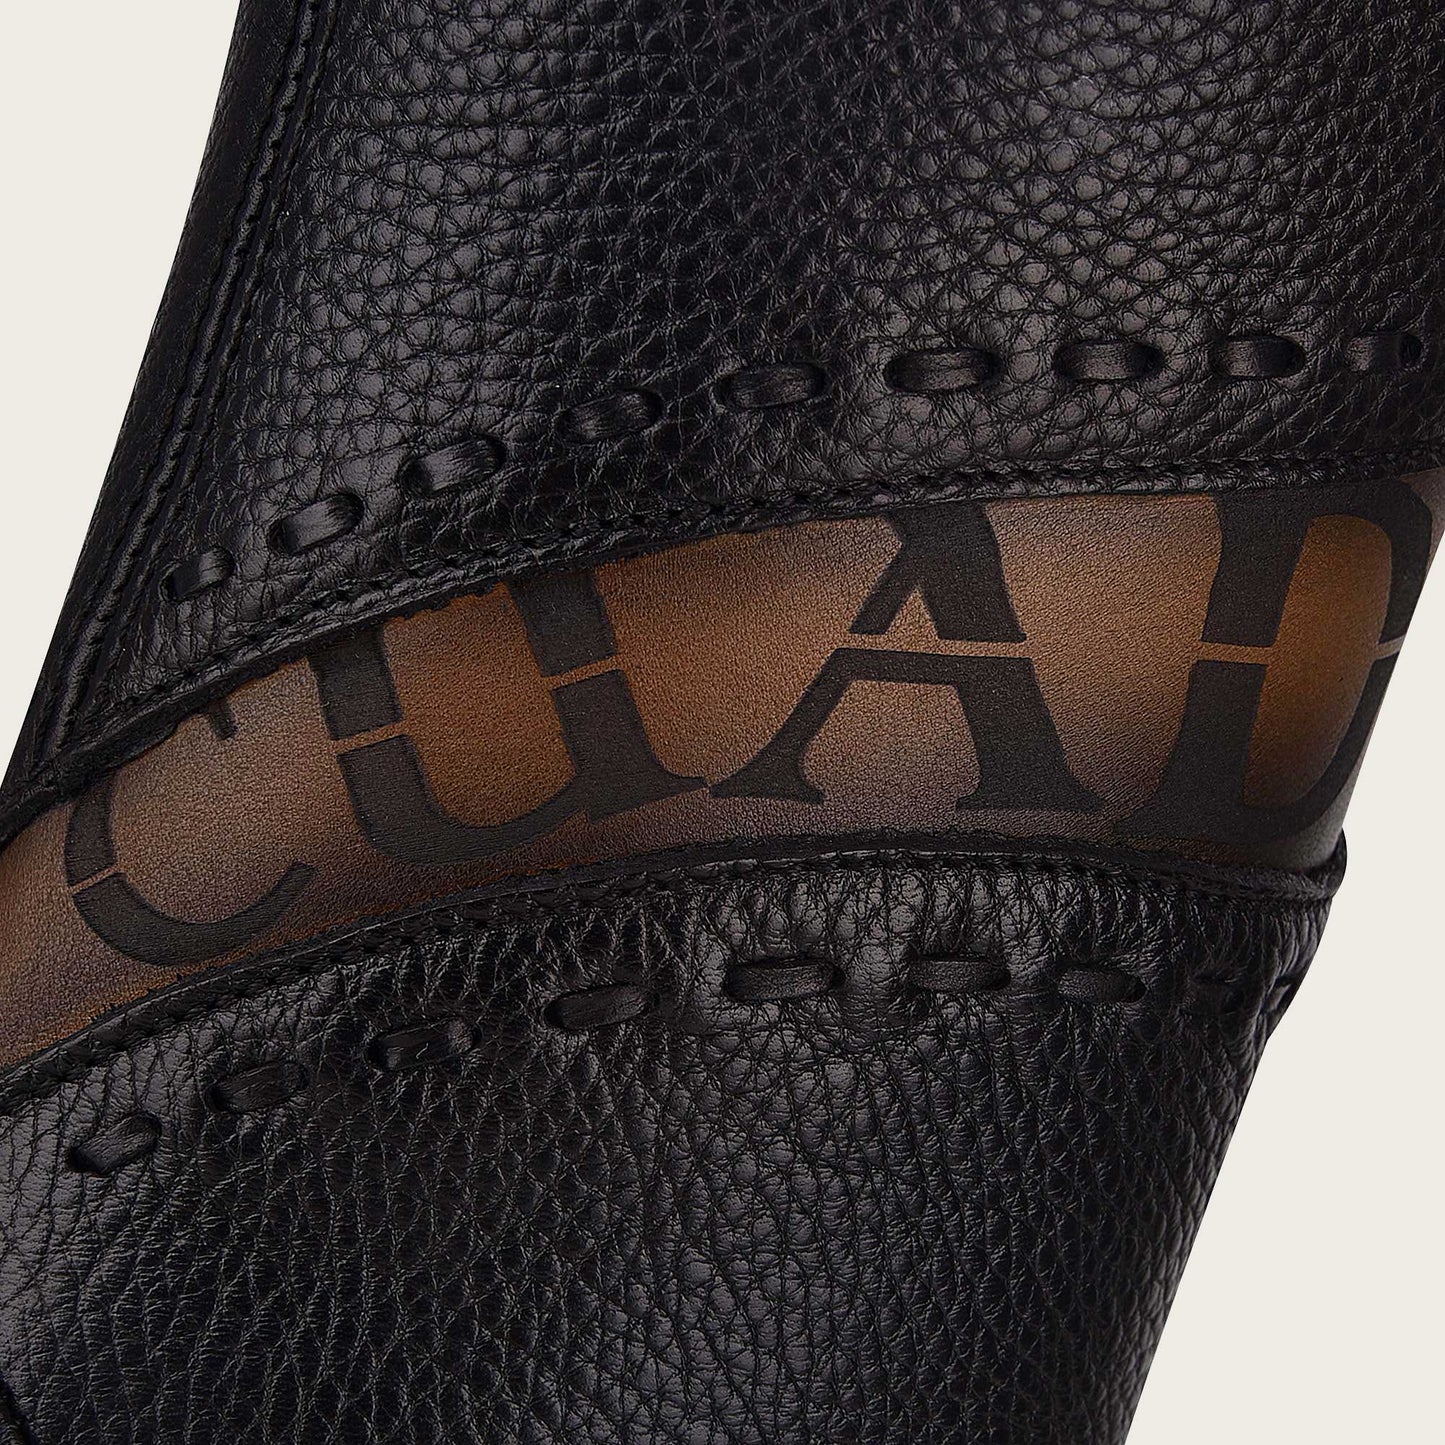 Engraved black leather boot - a classic and stylish addition to your footwear collection.